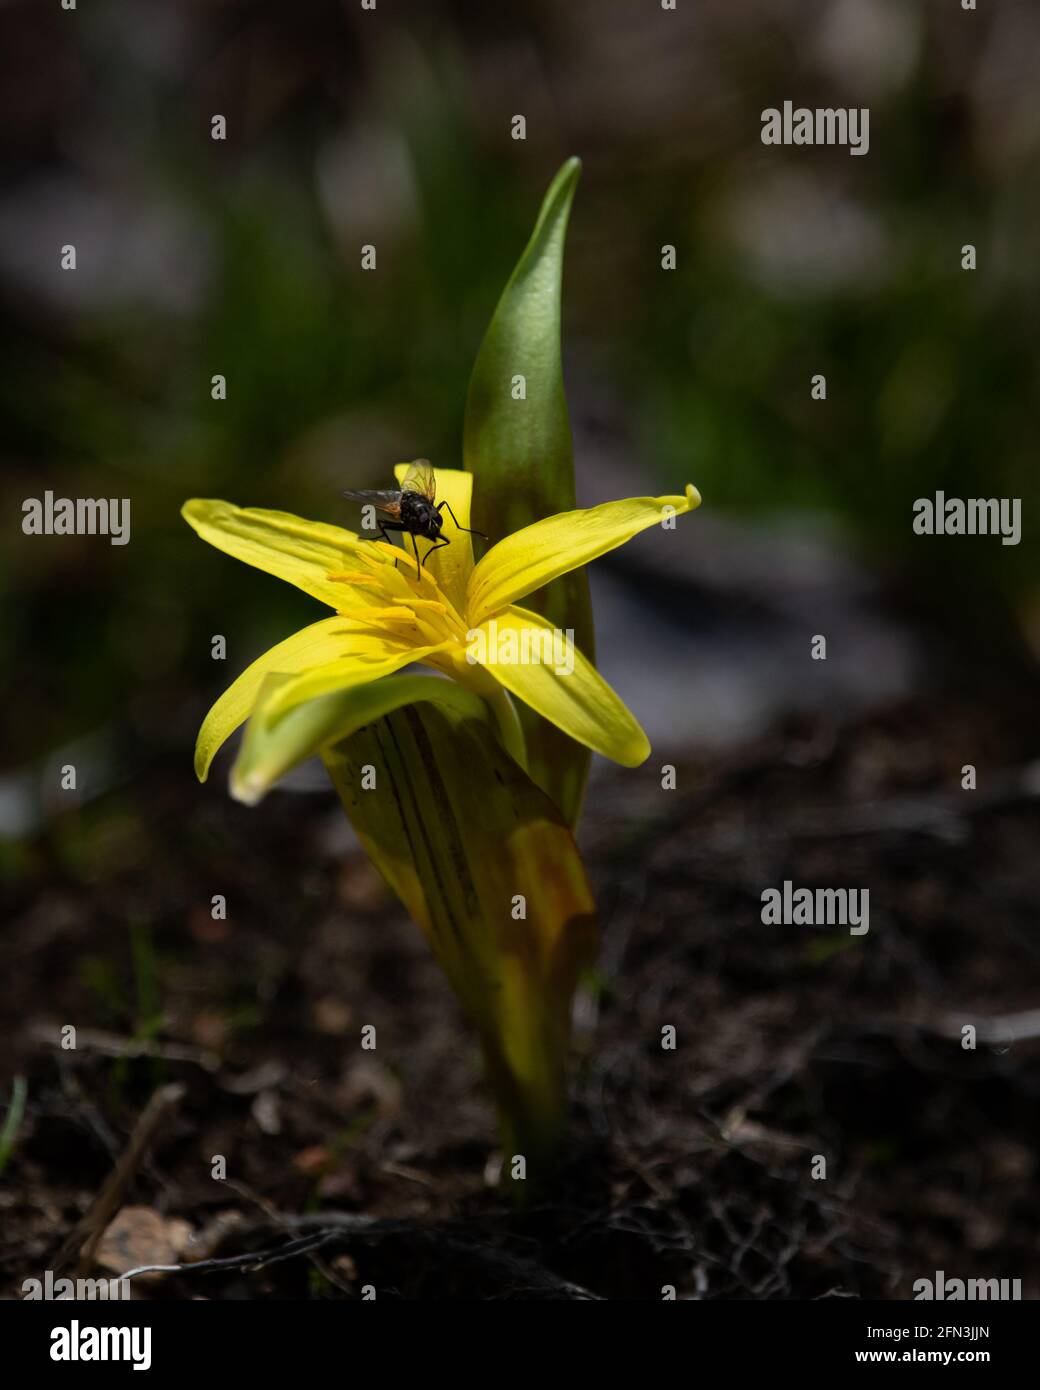 A fly sitting on a yellow trout lily flower, Erythronium americanum, growing in the Adirondack Mountains, NY wilderness in early spring Stock Photo